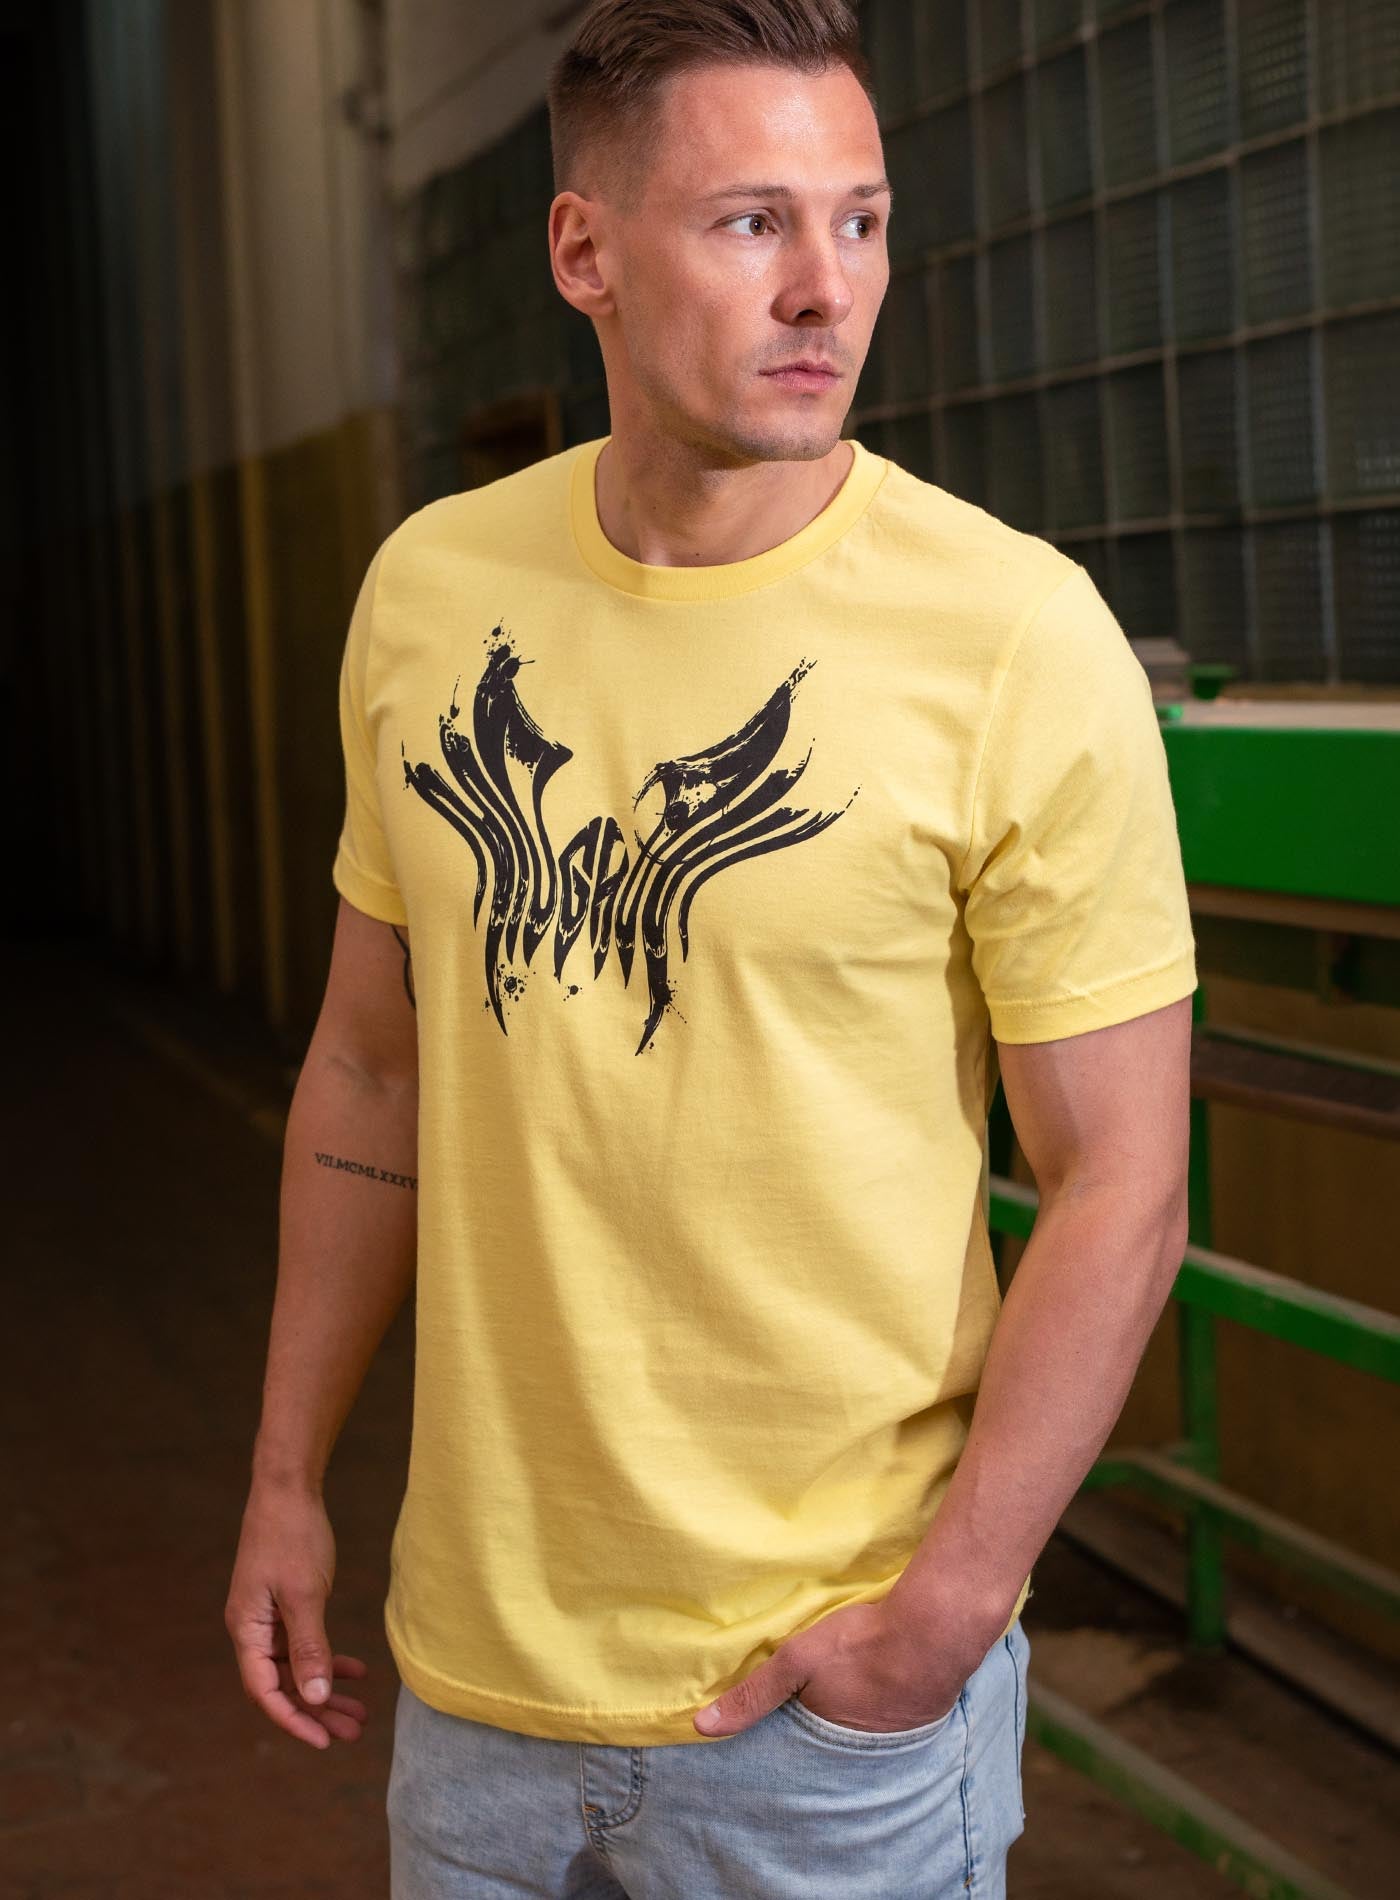 man modeling a yellow unisex t-shirt featuring a front print of the black Mr. Splatter Moghoul logo by Sasha Sidorovich